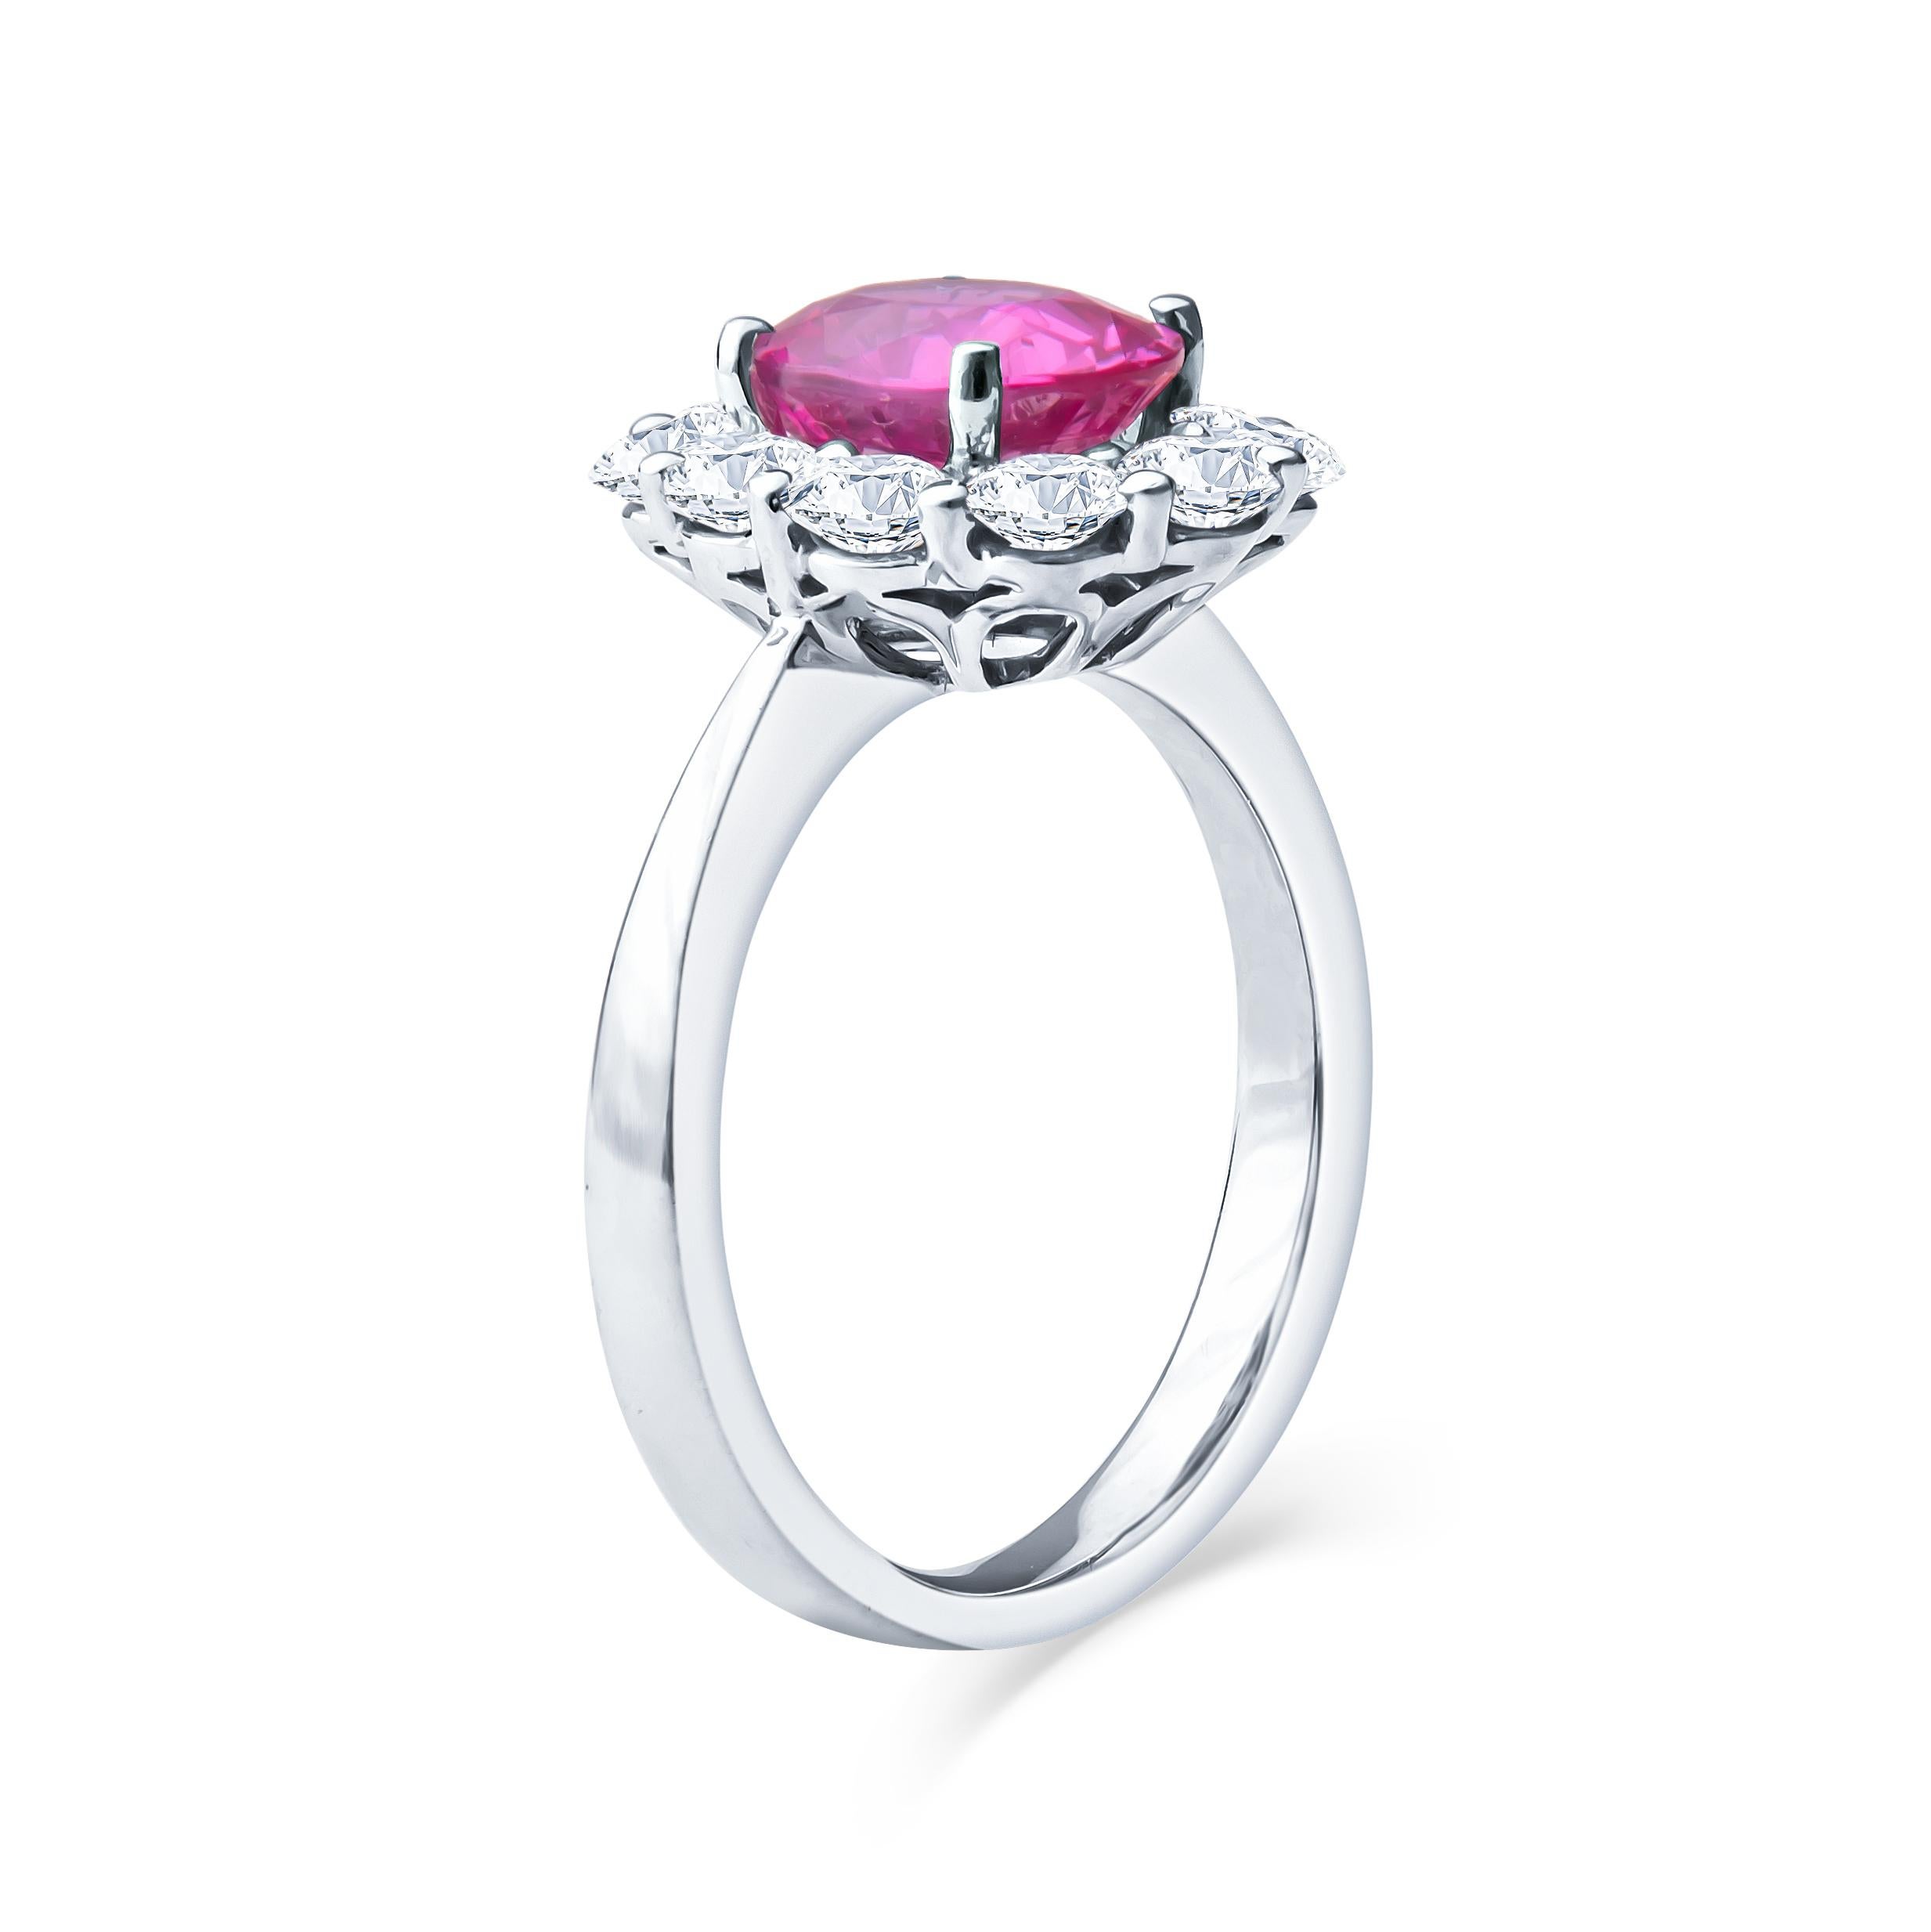 Oval Cut 2.20ct Oval Pink Sapphire with 1.17ctw Round Diamond Halo Floral White Gold Ring